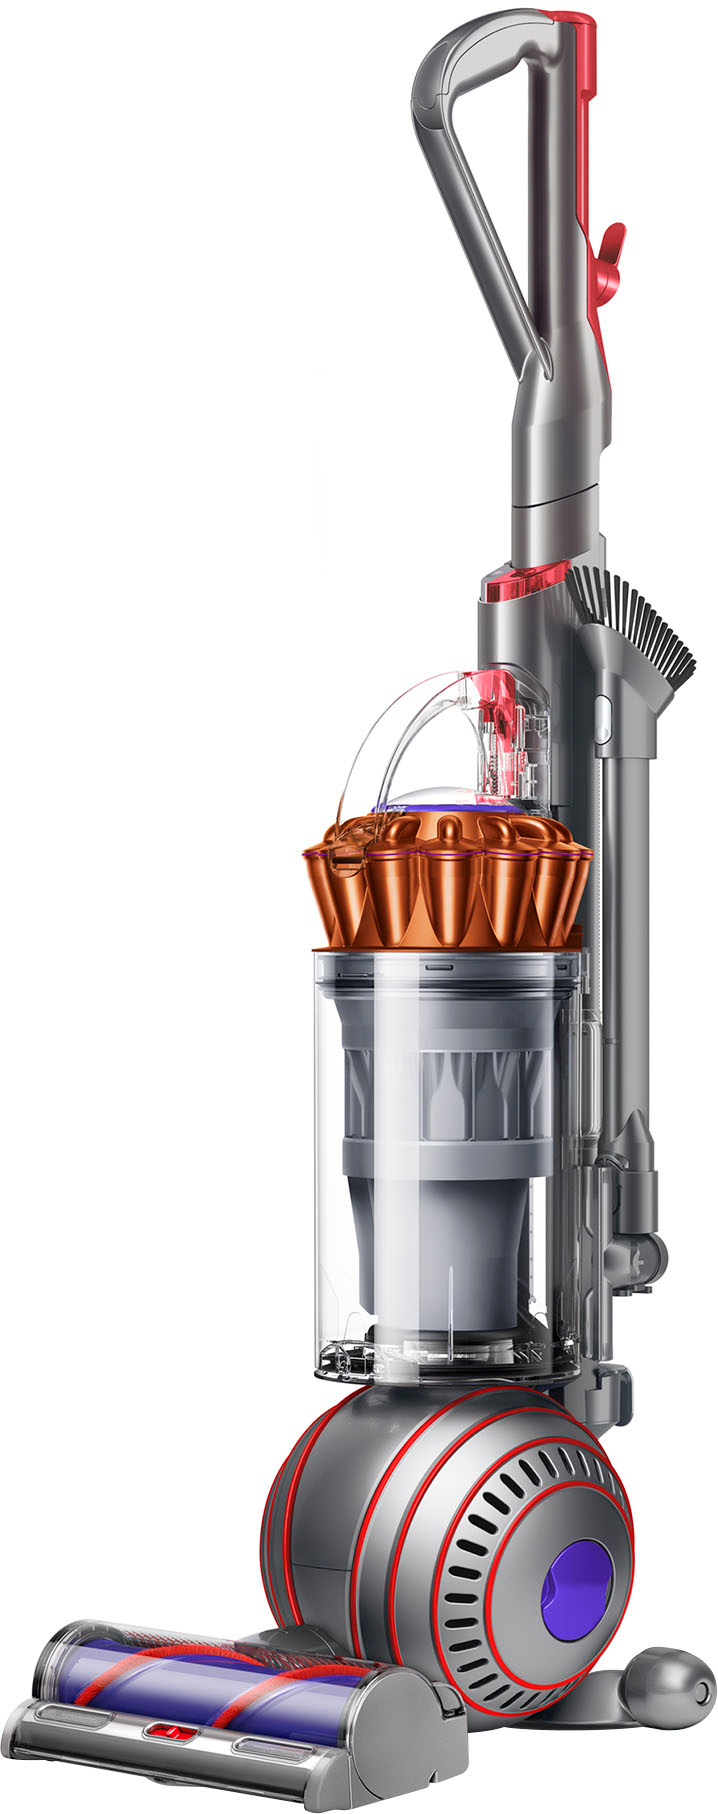 jul Mose Diskutere Dyson Ball Animal 3 Extra Upright Vacuum Copper/Silver 394515-01 - Best Buy